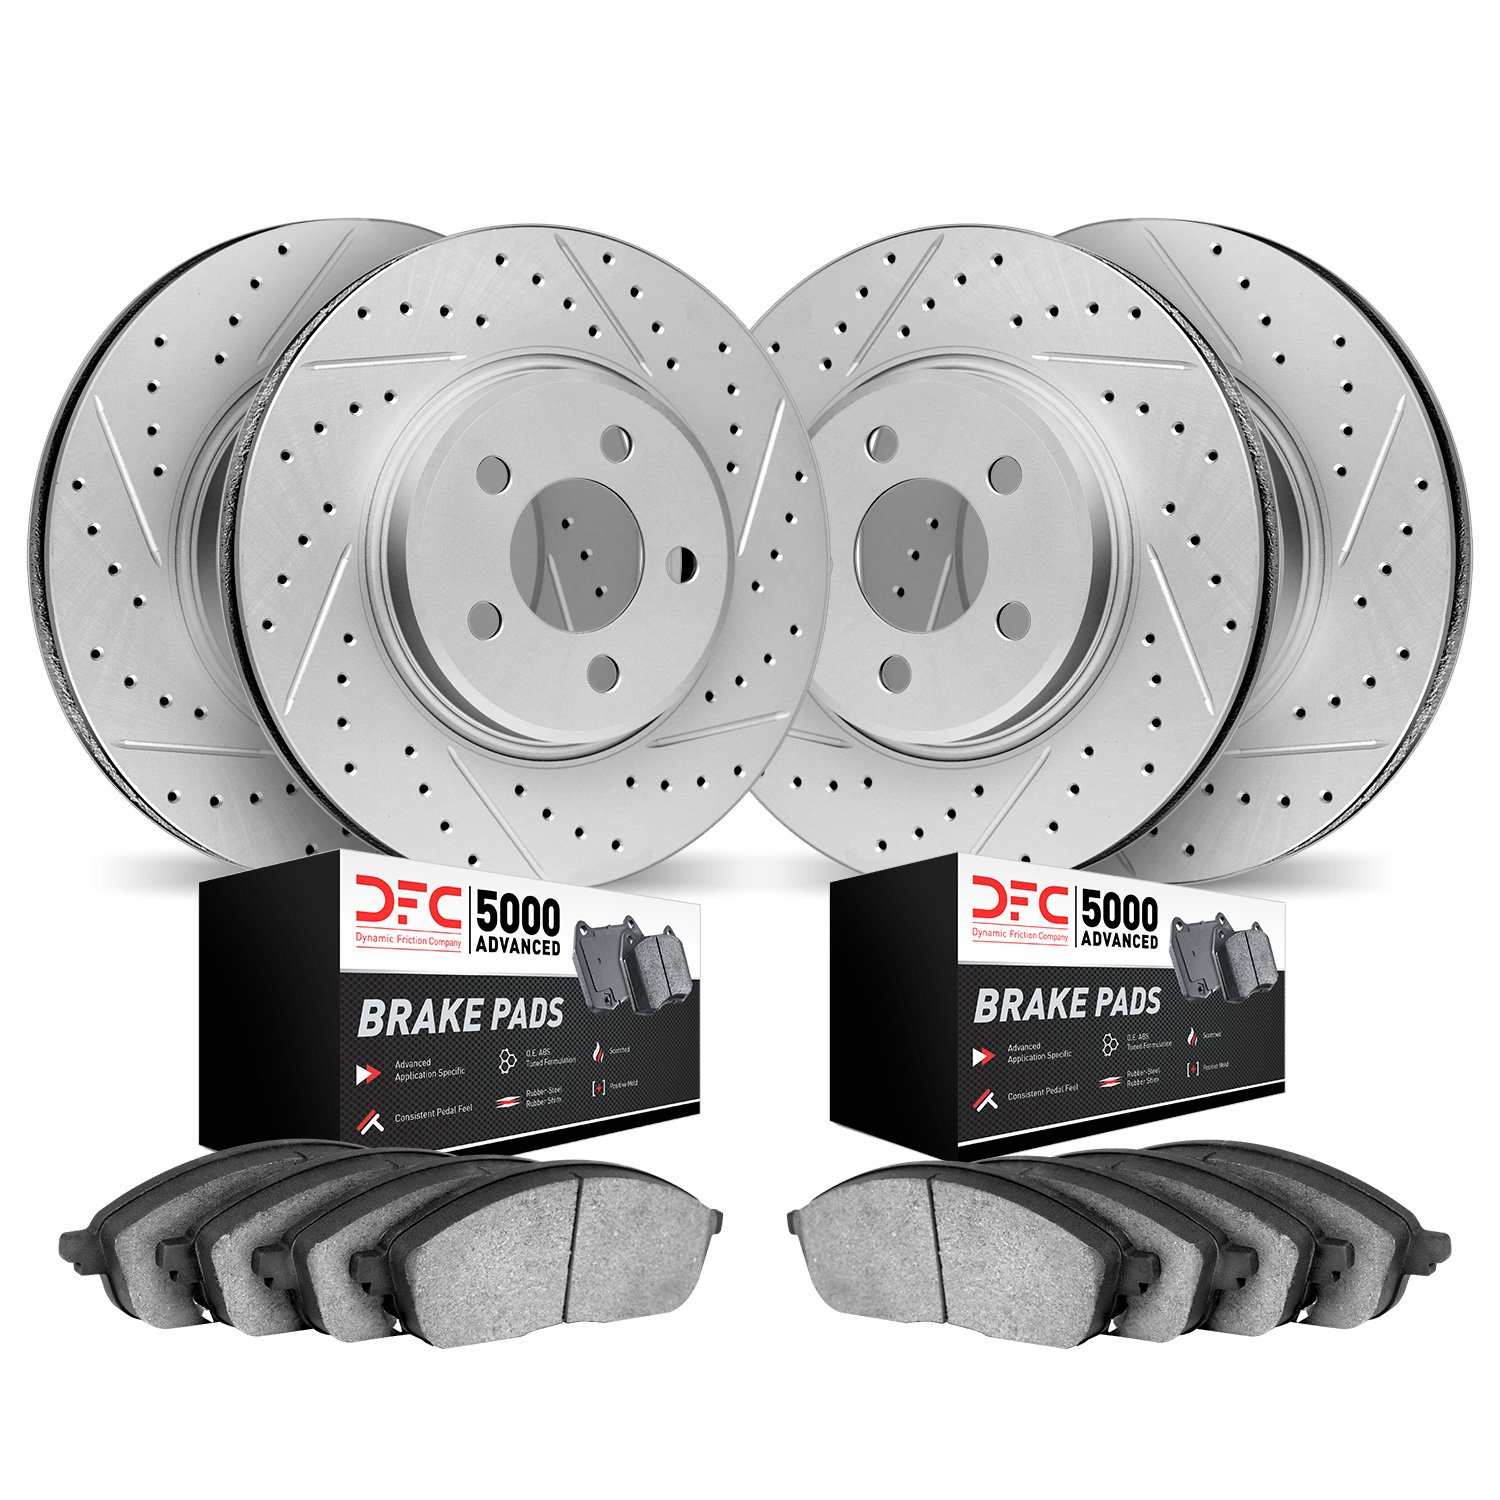 2504-65007 Geoperformance Drilled/Slotted Rotors w/5000 Advanced Brake Pads Kit, 2011-2011 GM, Position: Front and Rear